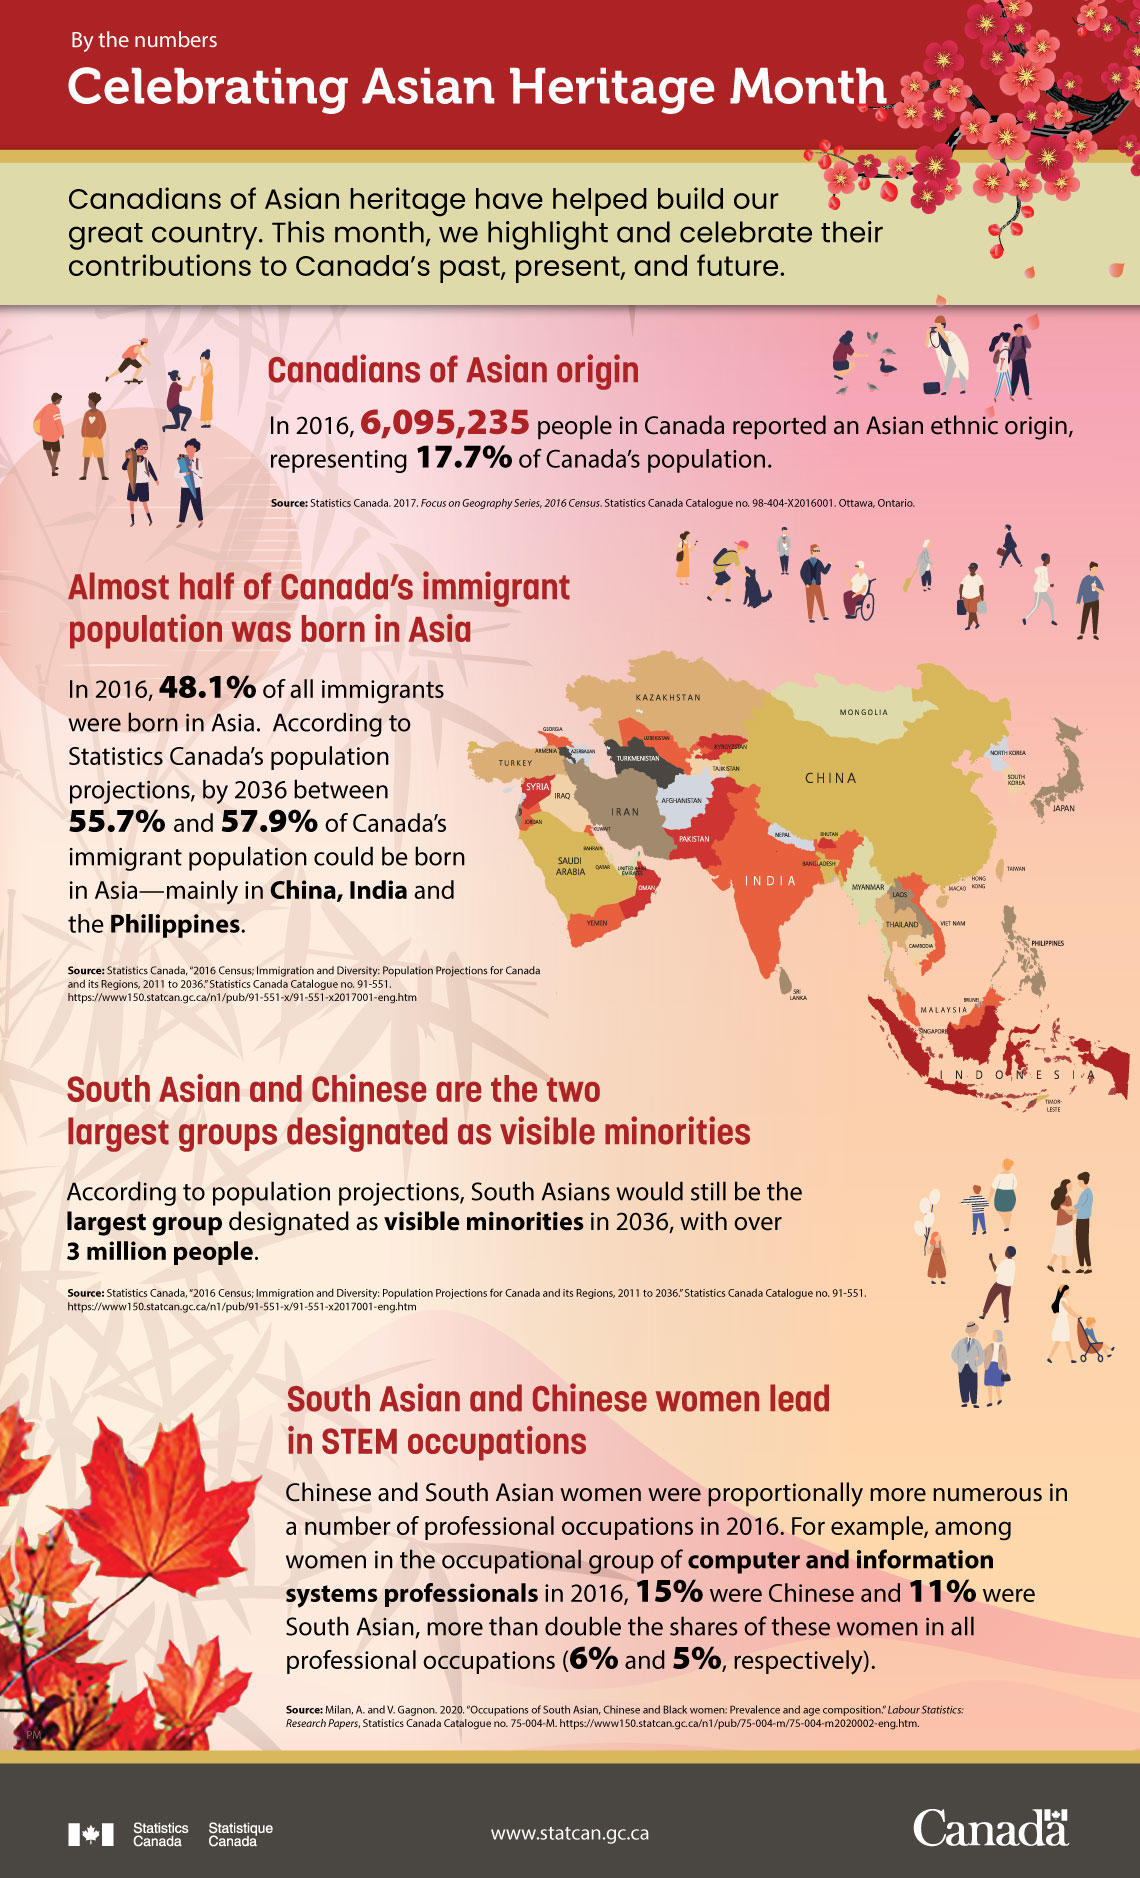 Statistics Canada Infographic: By the Numbers, Celebrating Asian Heritage Month. Canadians of Asian Origin states that in 2016, 6,095,235 people in Canada reported an Asian ethnic origin, representing 17.7% of Canada's population. Almost half of Canada's immigrant population was born in Asia. South Asian and Chinese are two largest groups designated as visible minorities.